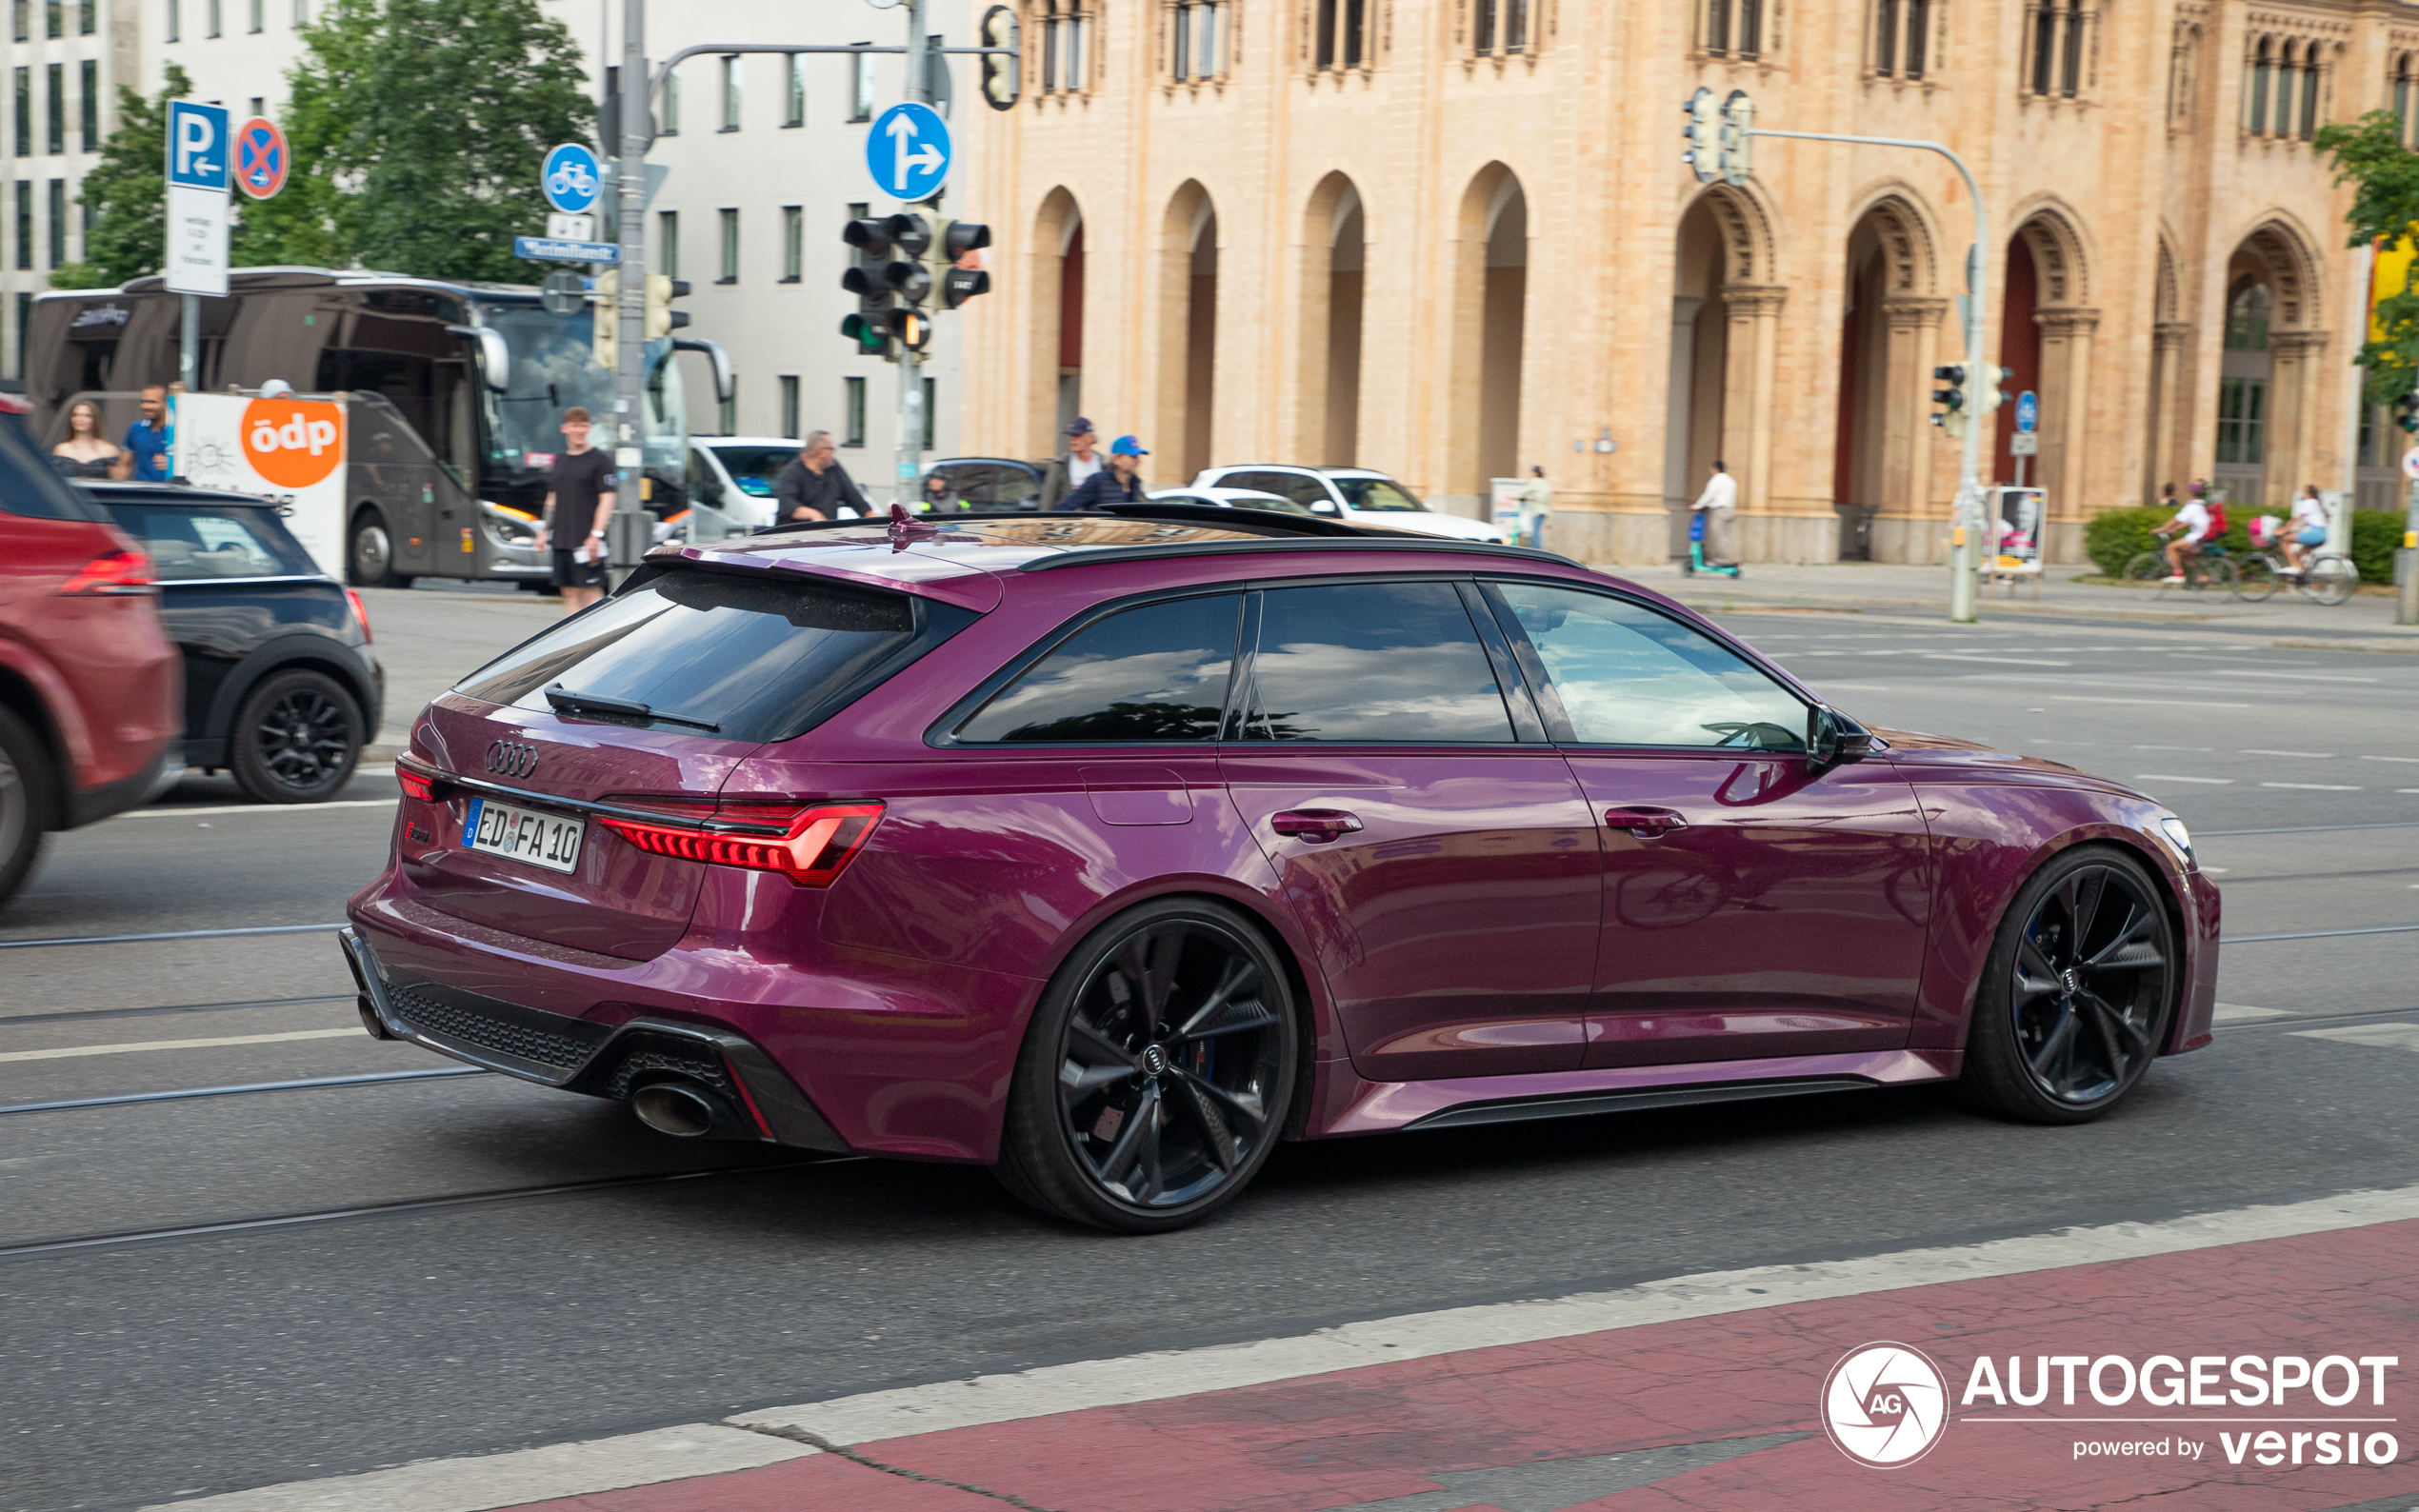 Striking color on the RS6 in Munich